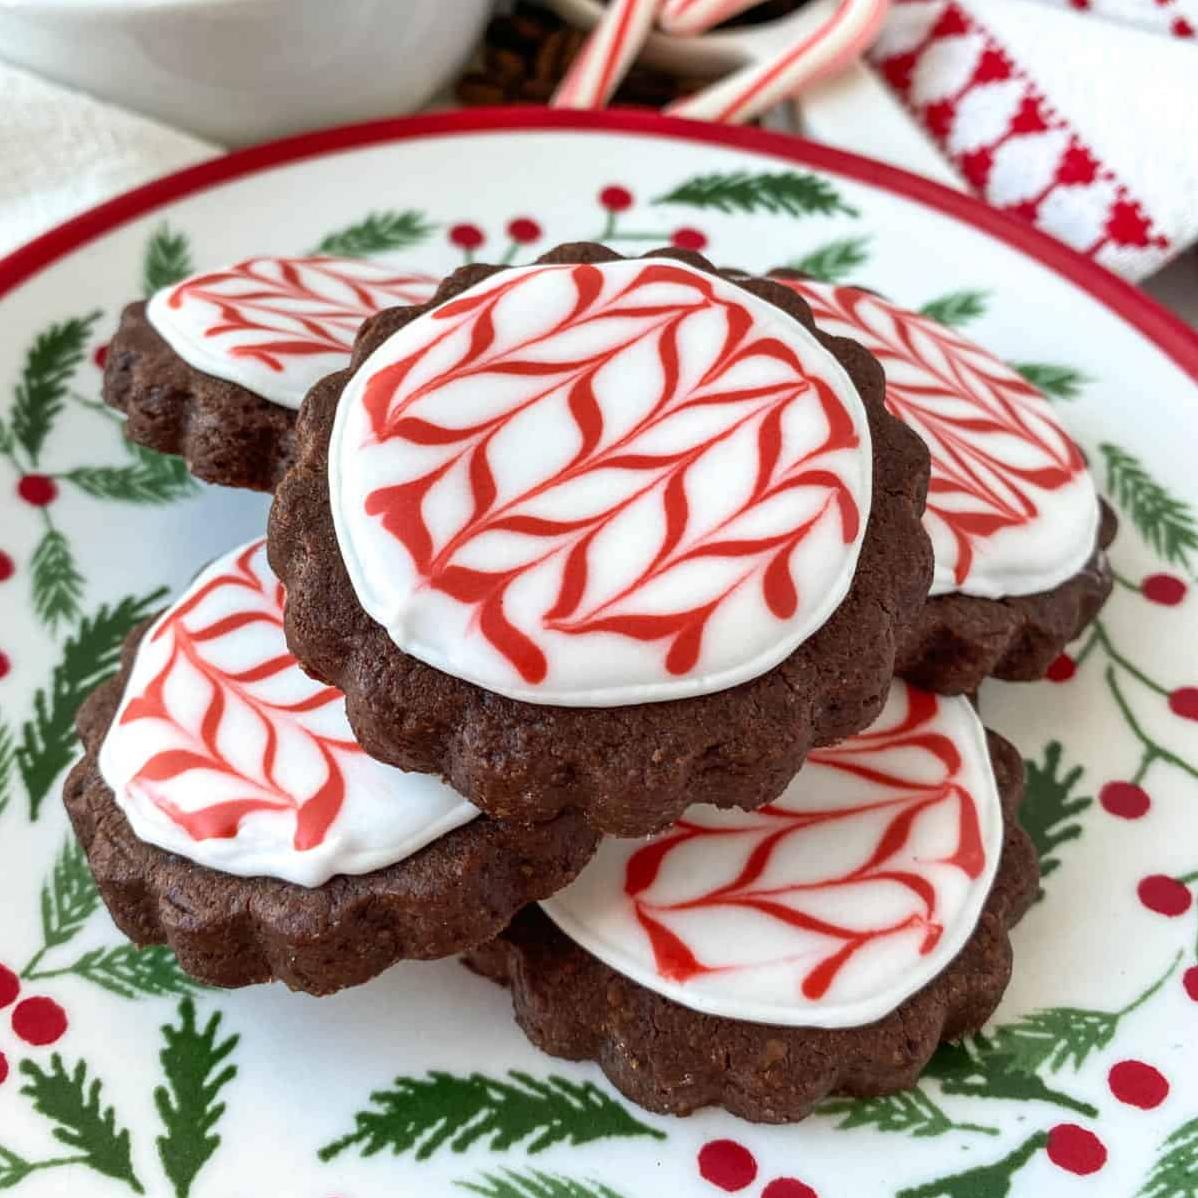 Delicious Peppermint Mocha Cookies Recipe to Try at Home